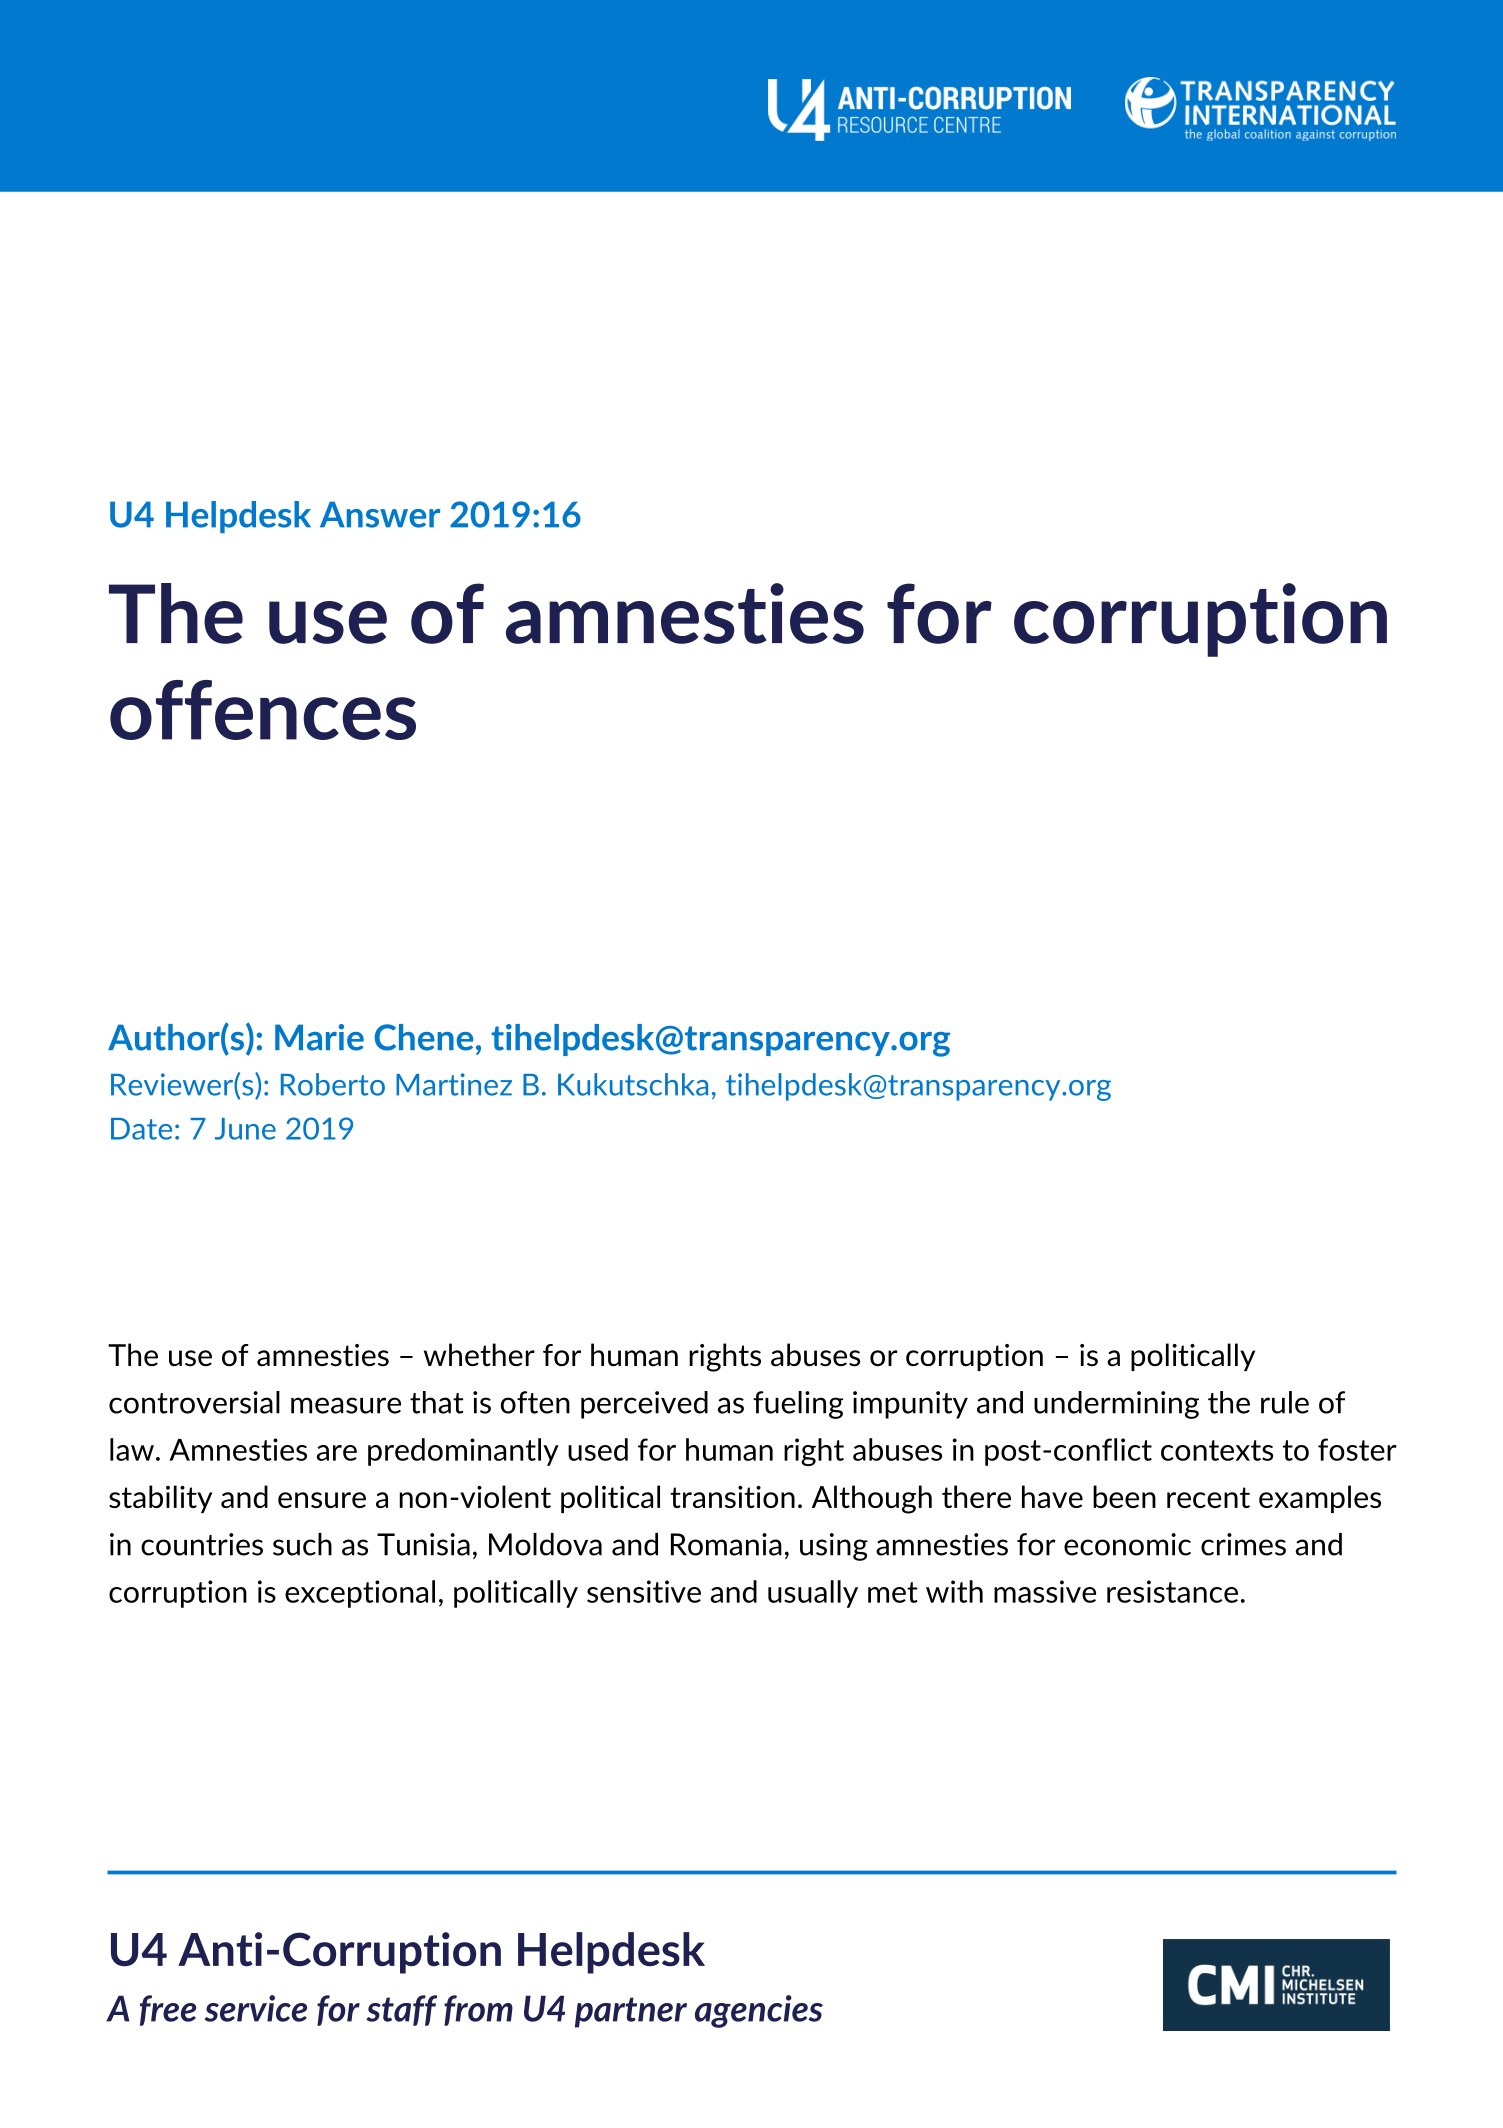 The use of amnesties for corruption offences